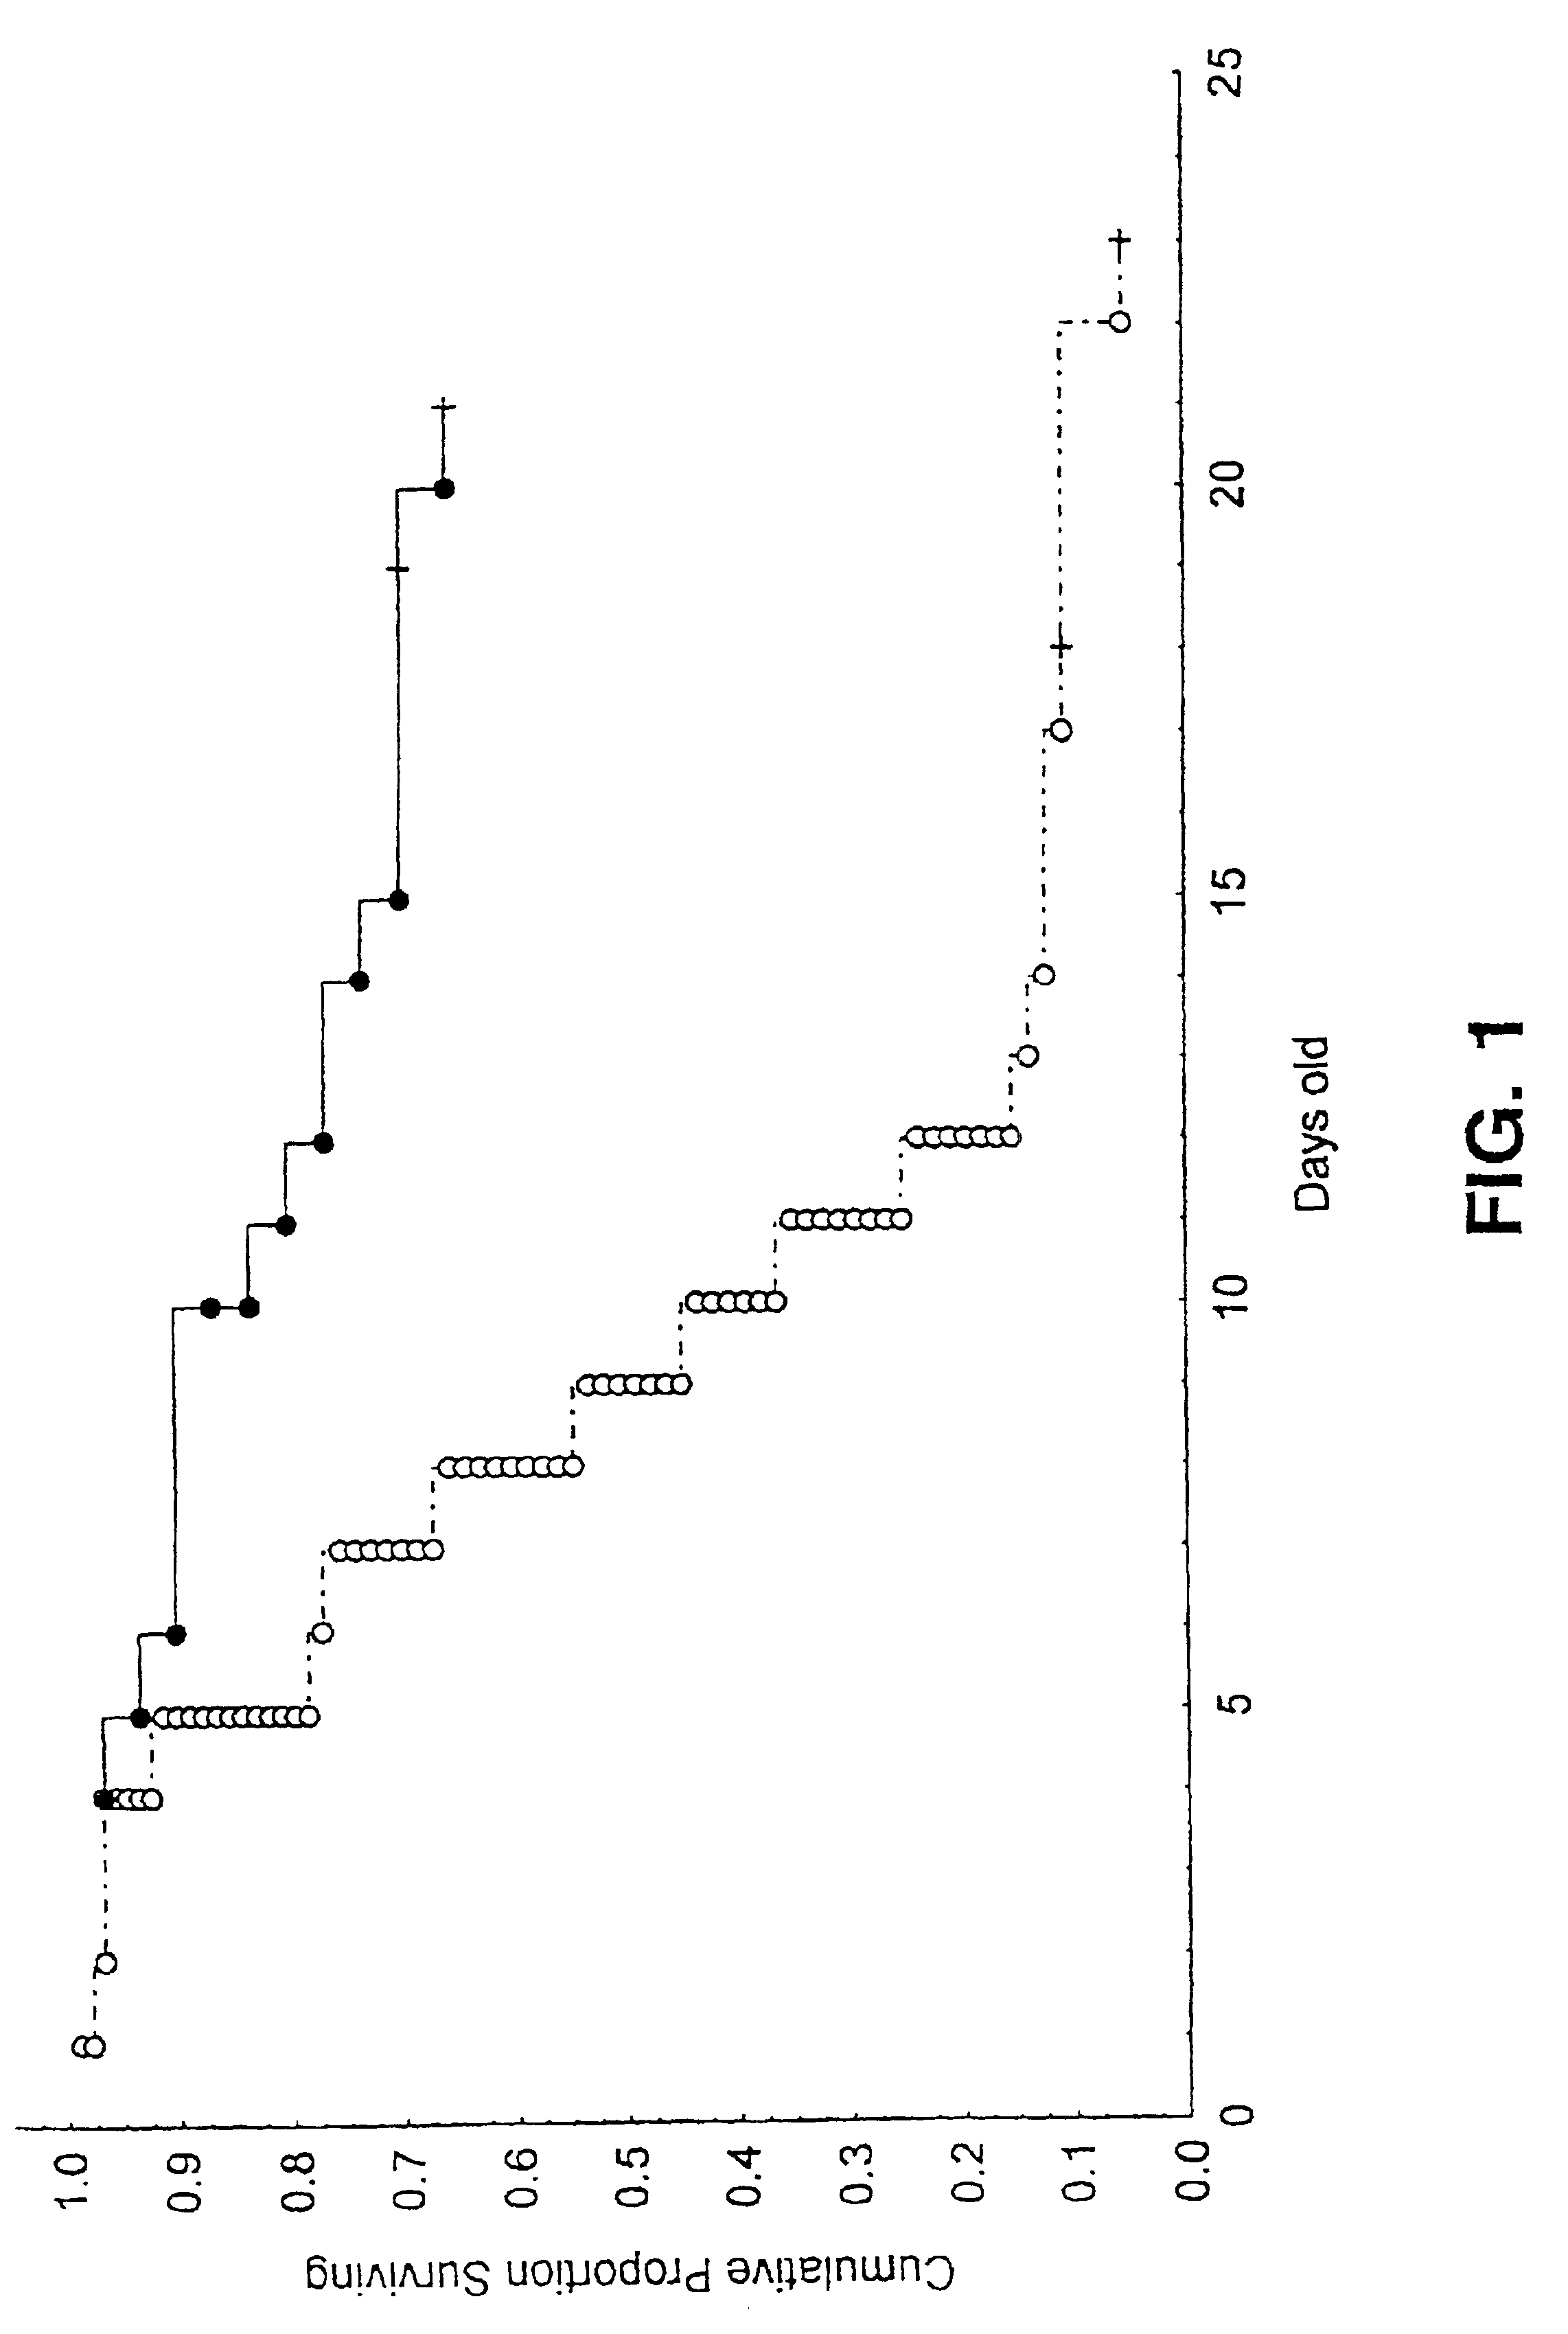 Methods for identifying compounds as antioxidants